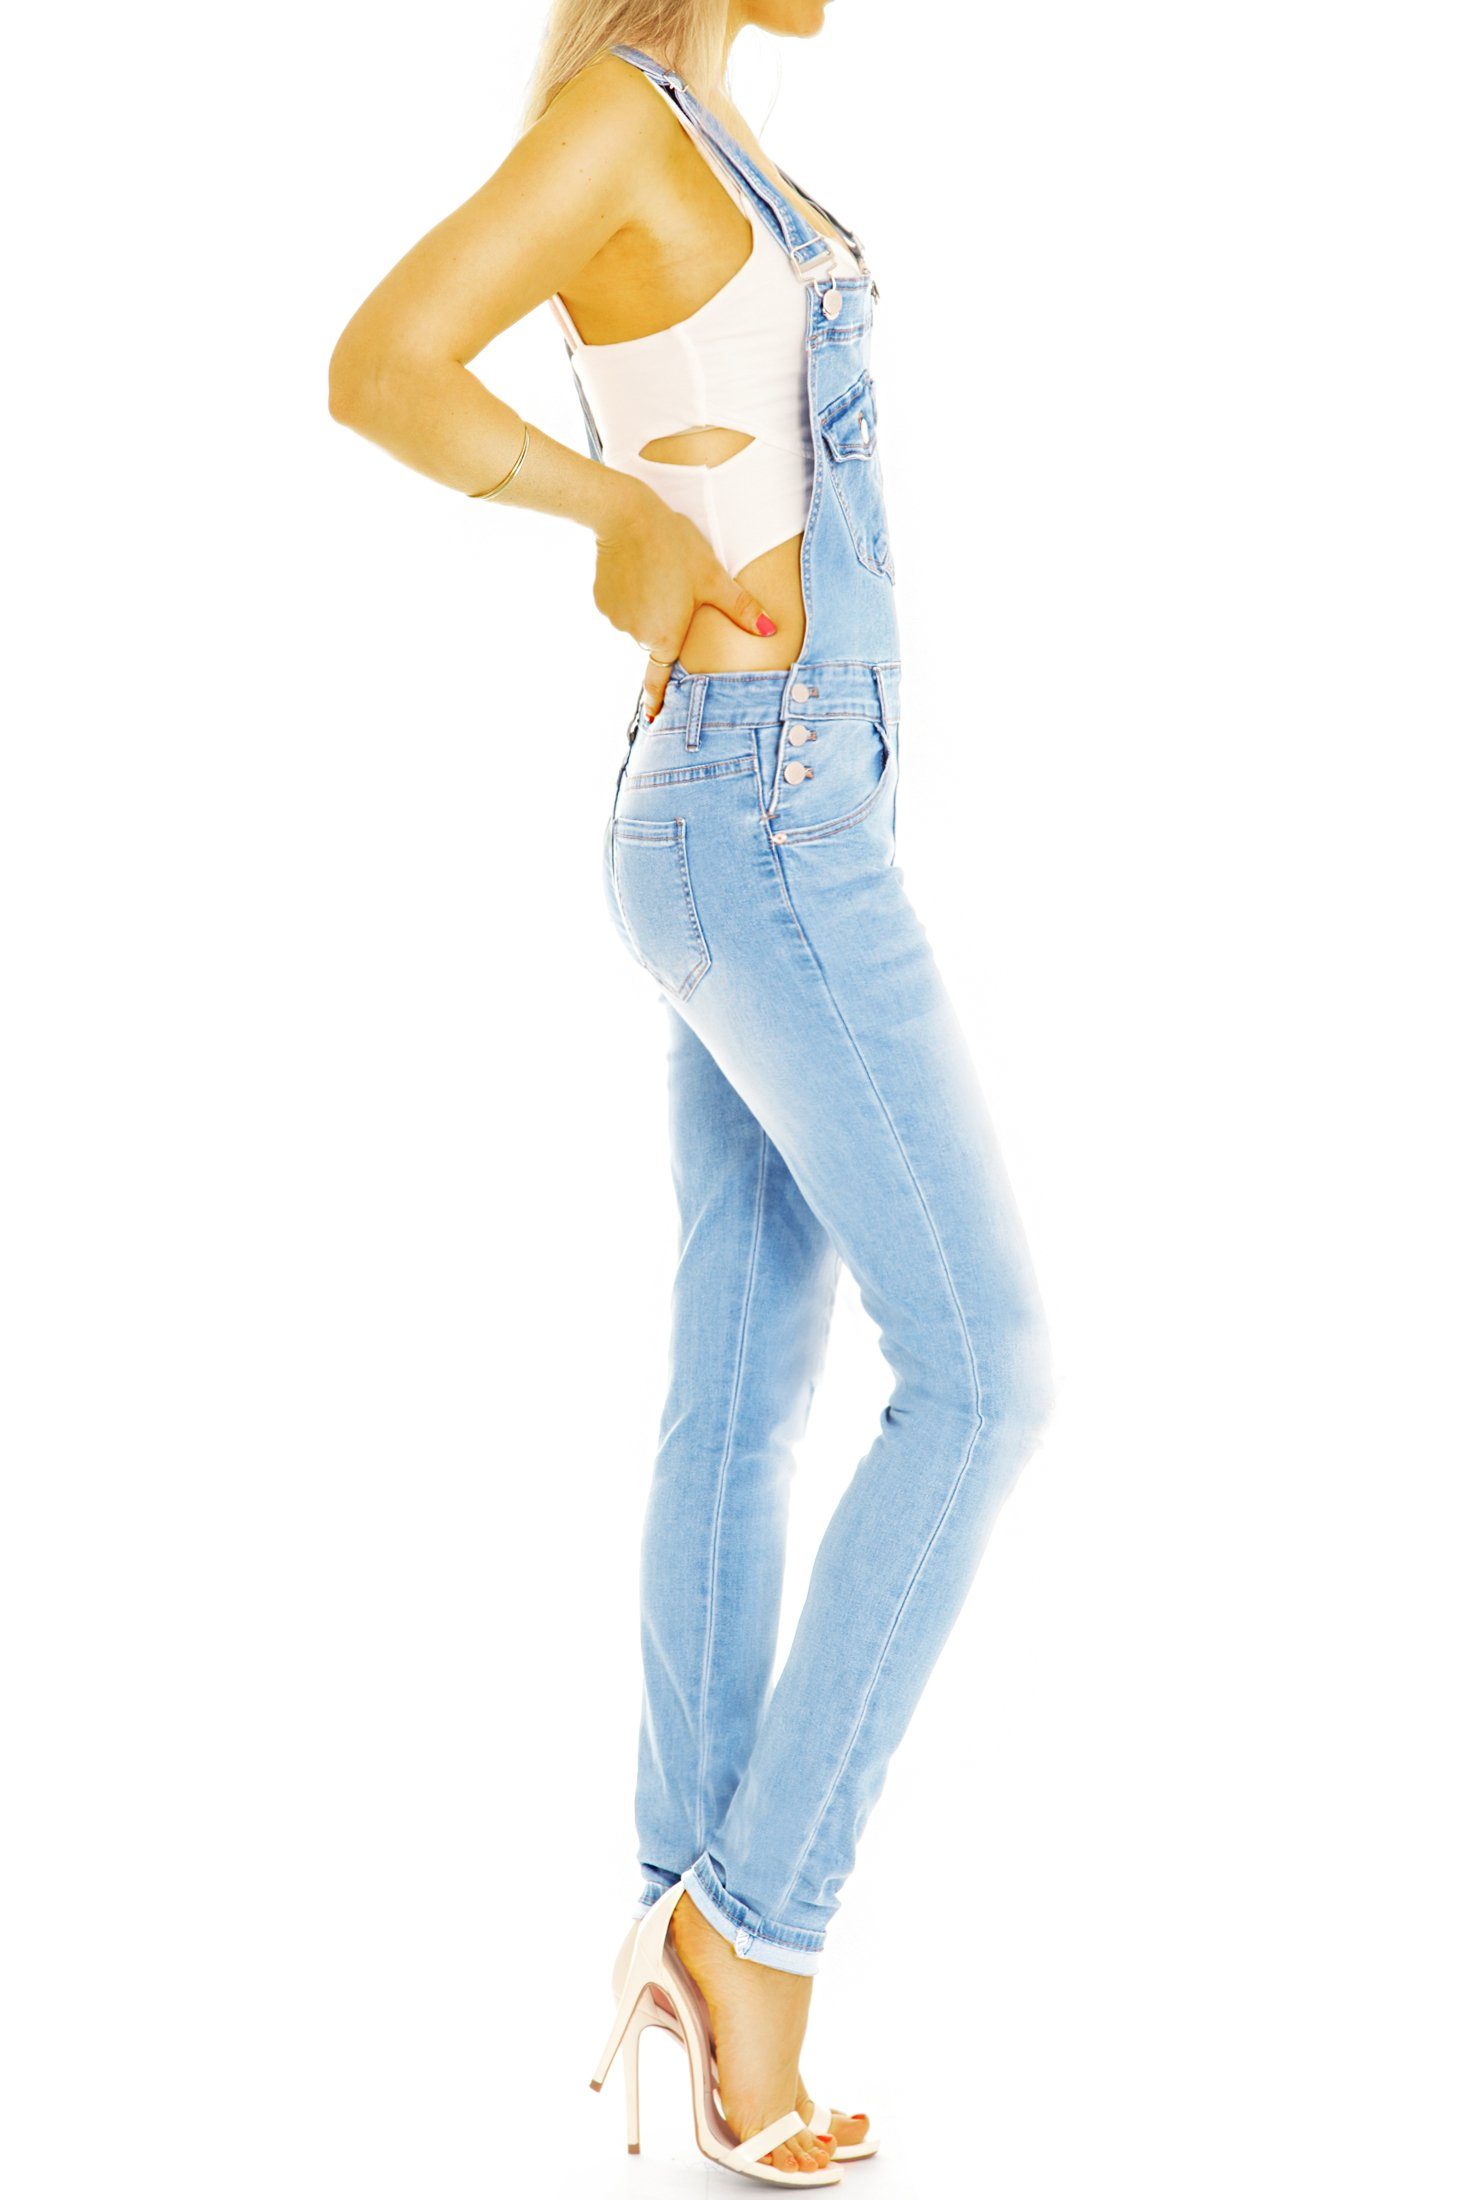 be styled Jeanslatzhose Damen skinny - 5-Pocket-Style mit bequemer Latzhose in j20g - Jeans fit Overall hellblau Stretch-Anteil